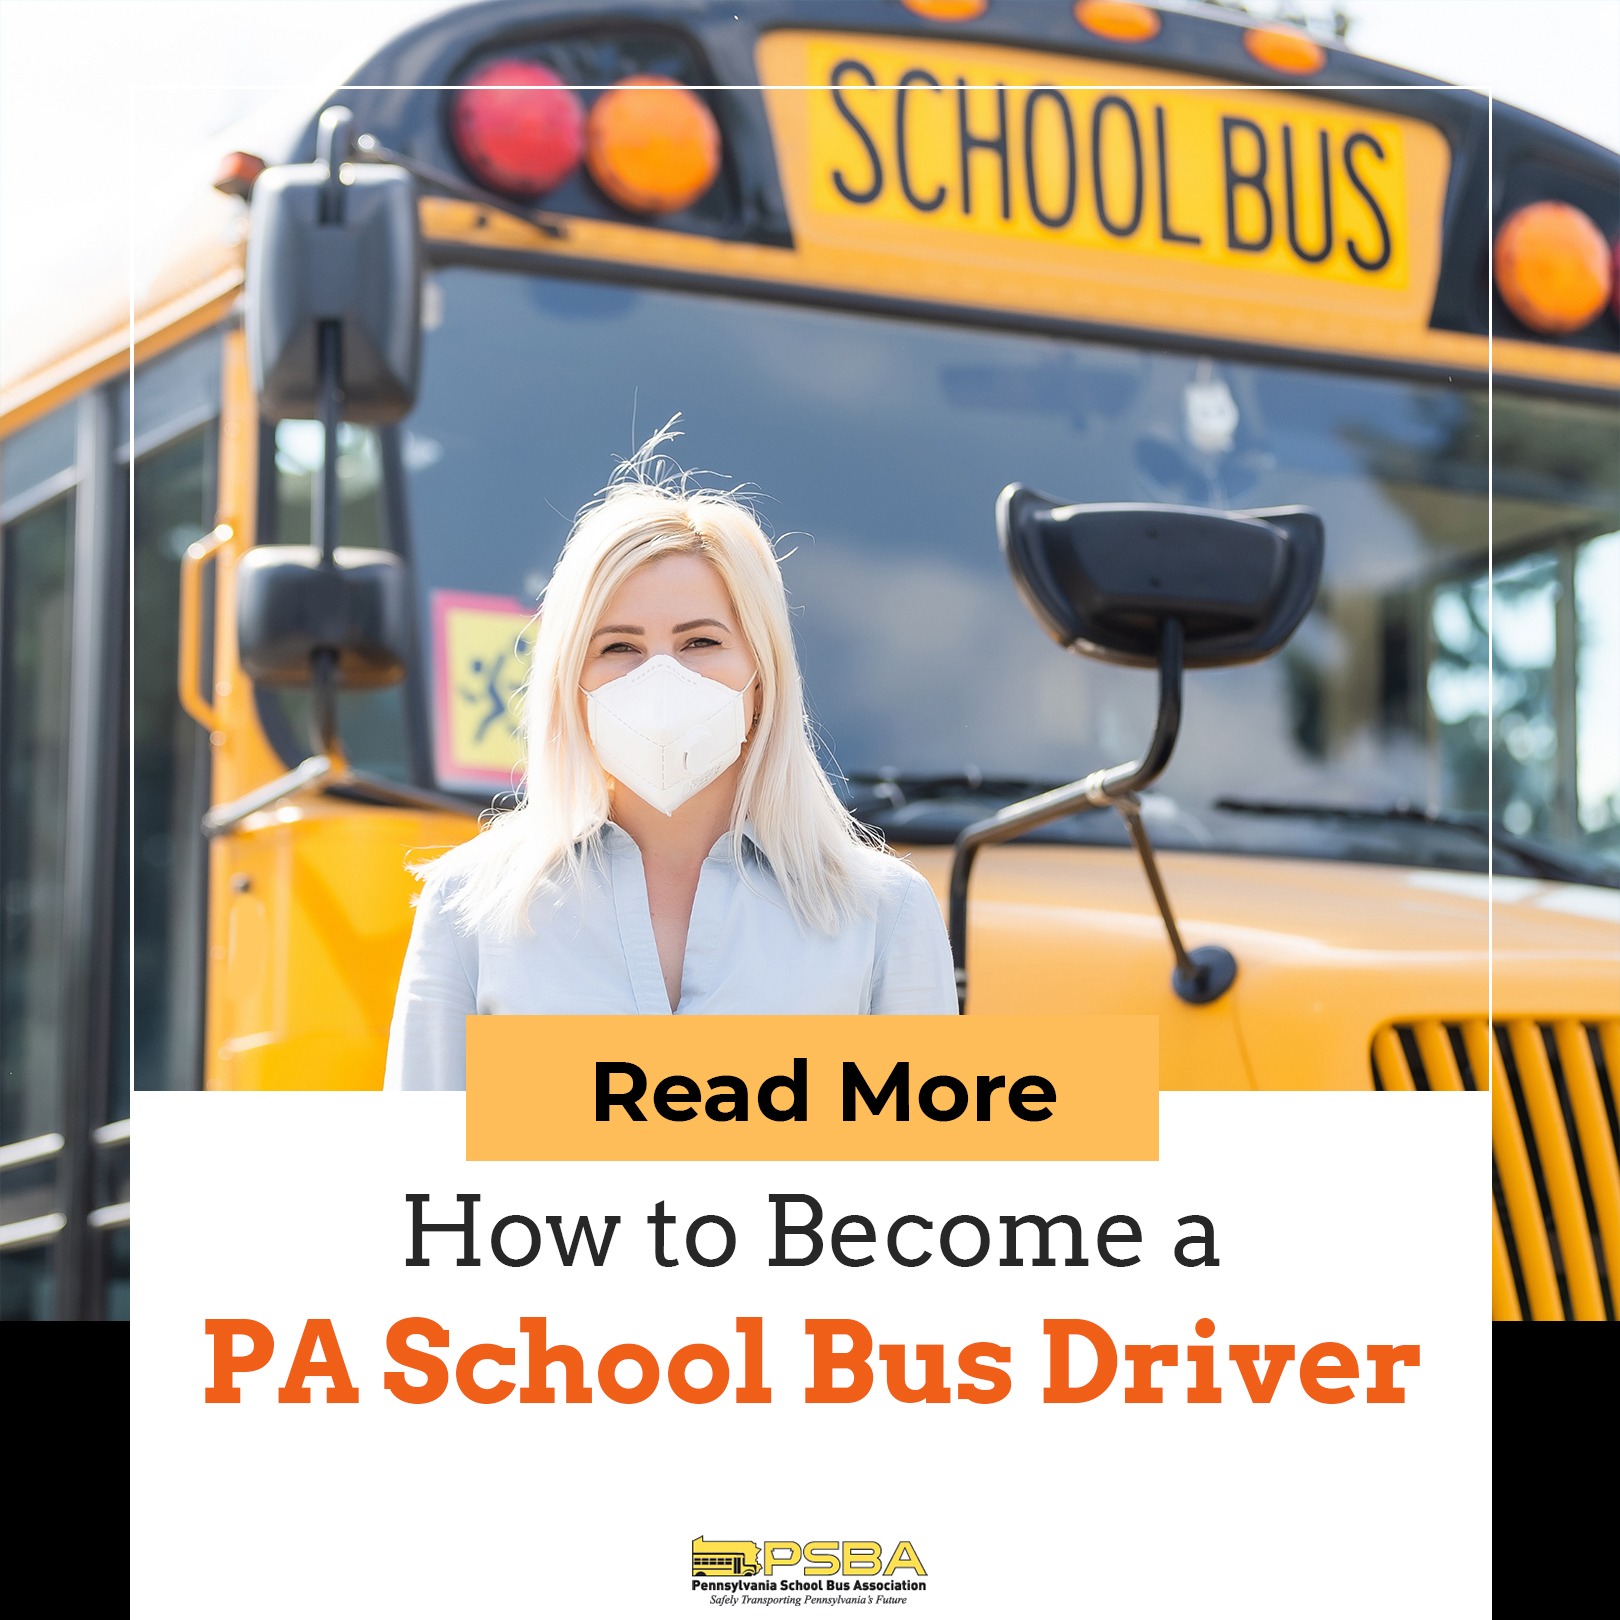 How to Become a PA School Bus Driver